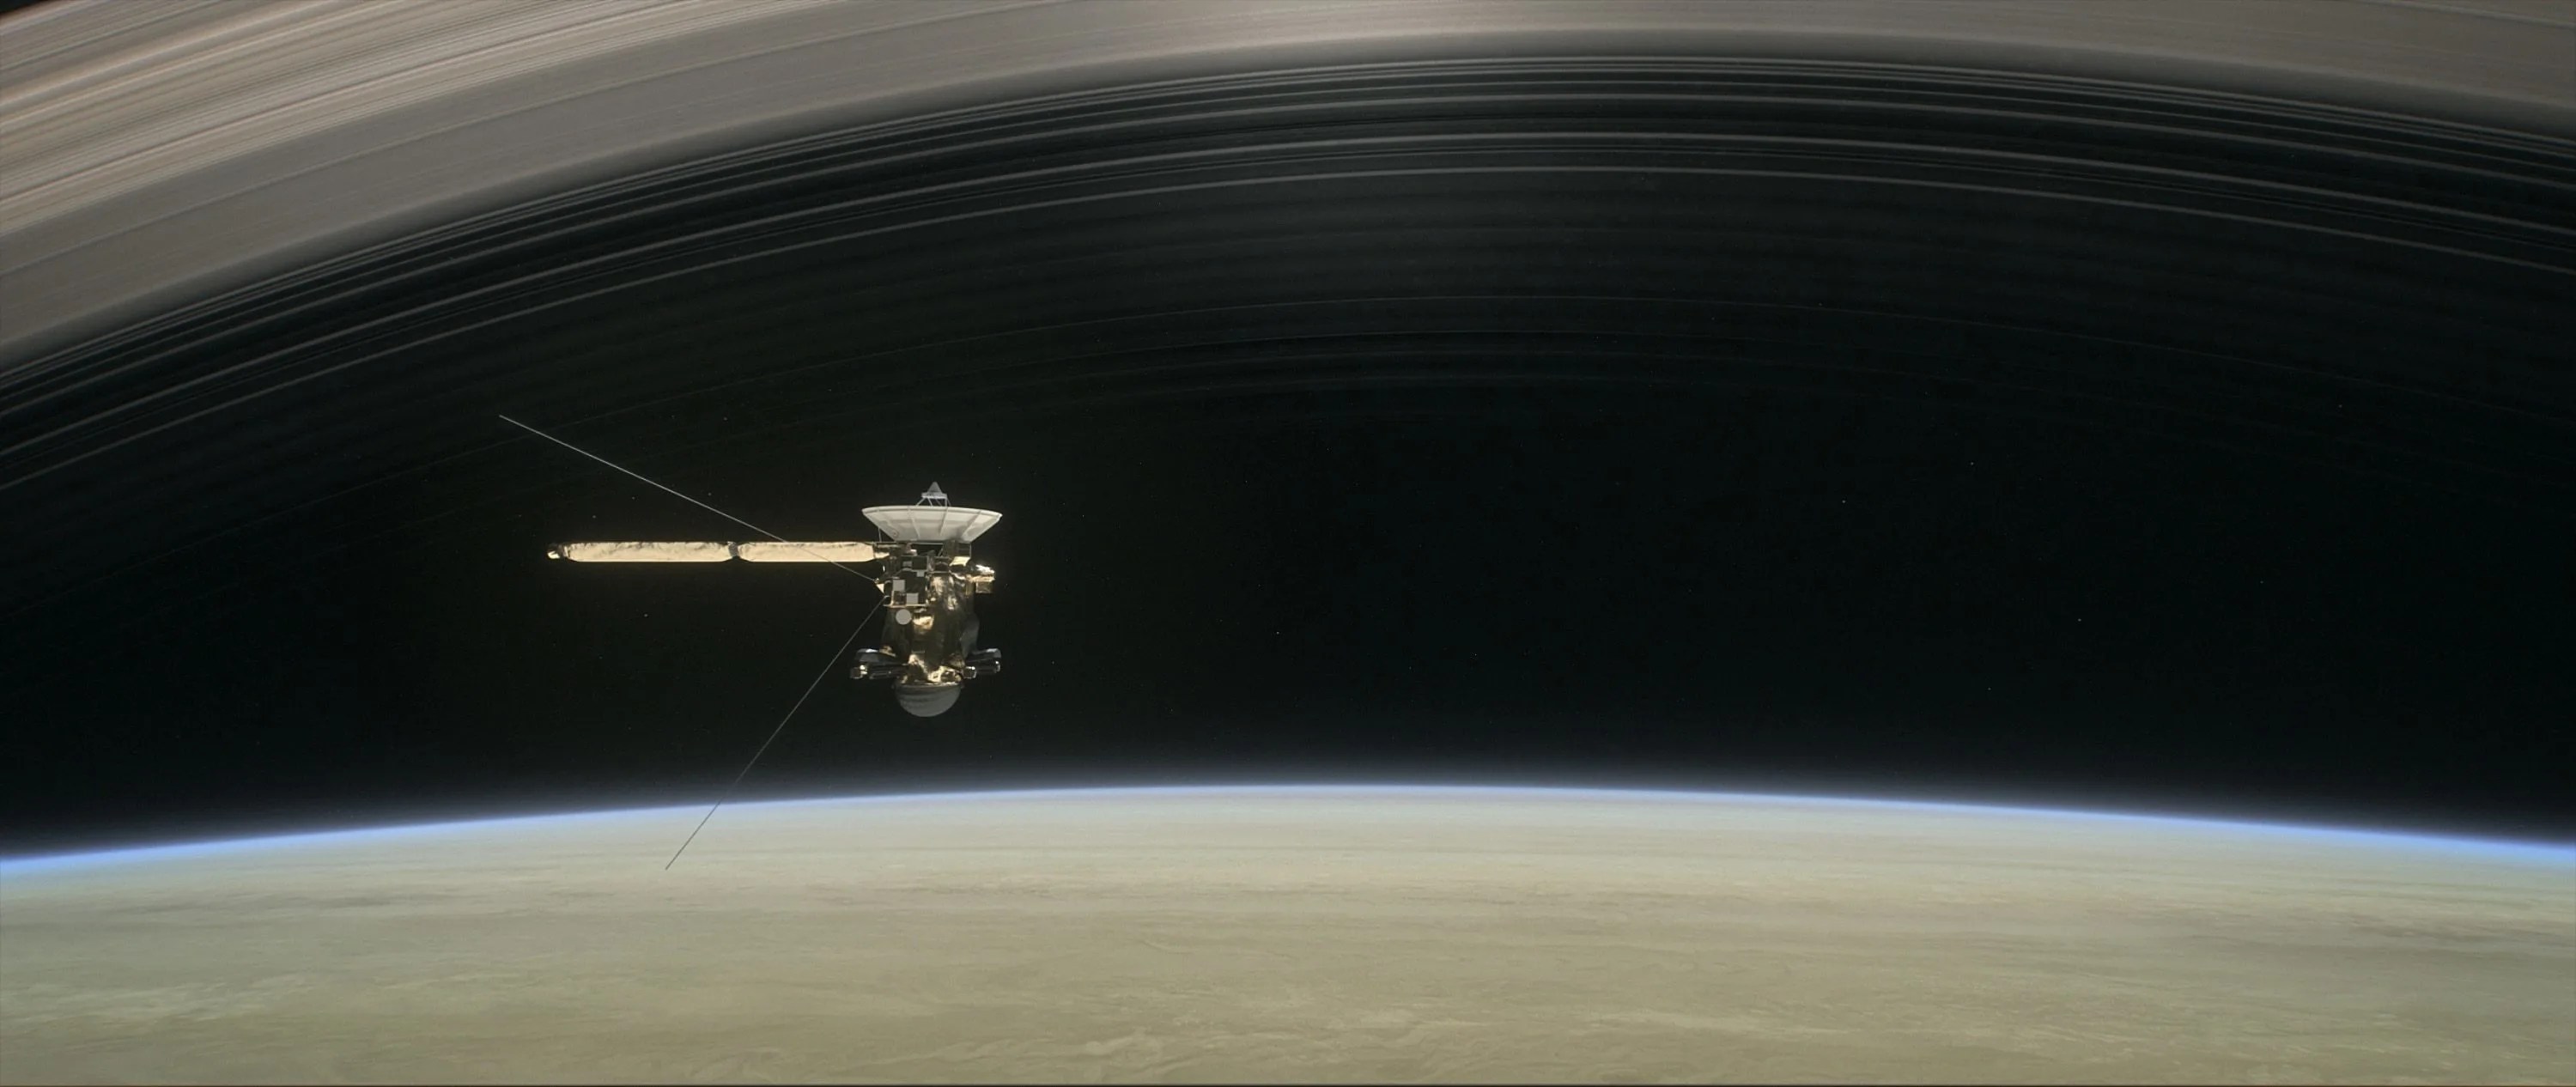 This artist's rendering shows Cassini as the spacecraft makes one of its final five dives